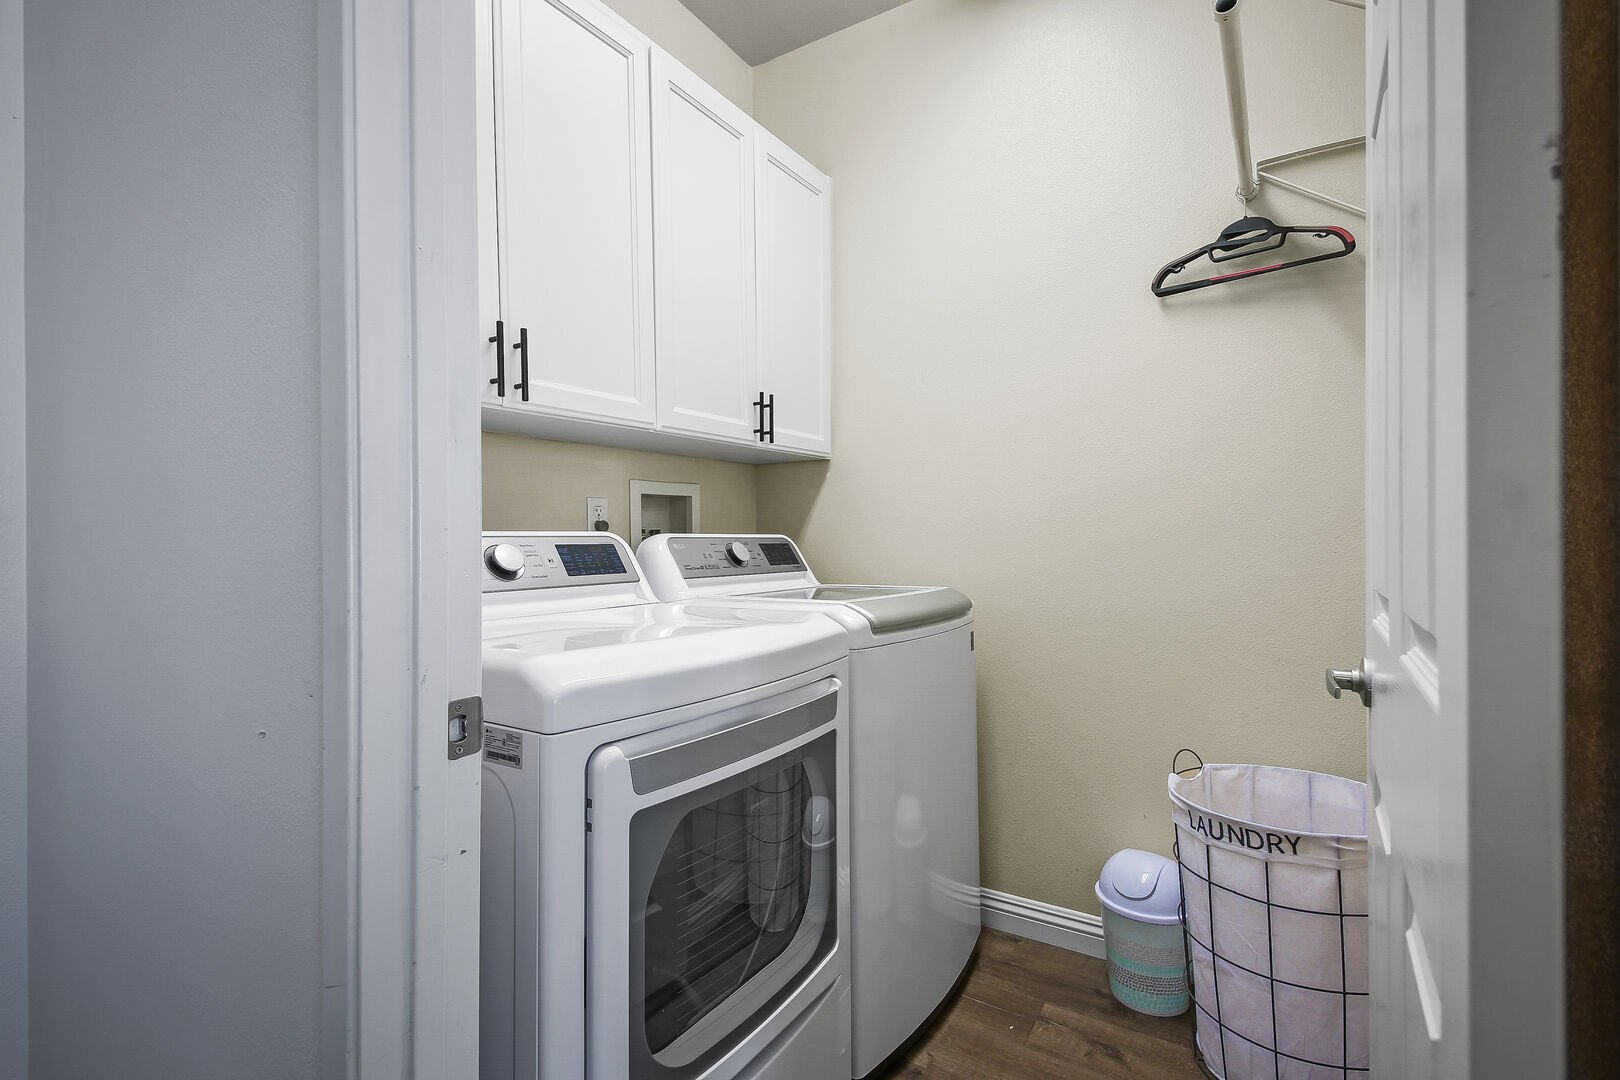 This home offers a washer and dryer with laundry pods included.